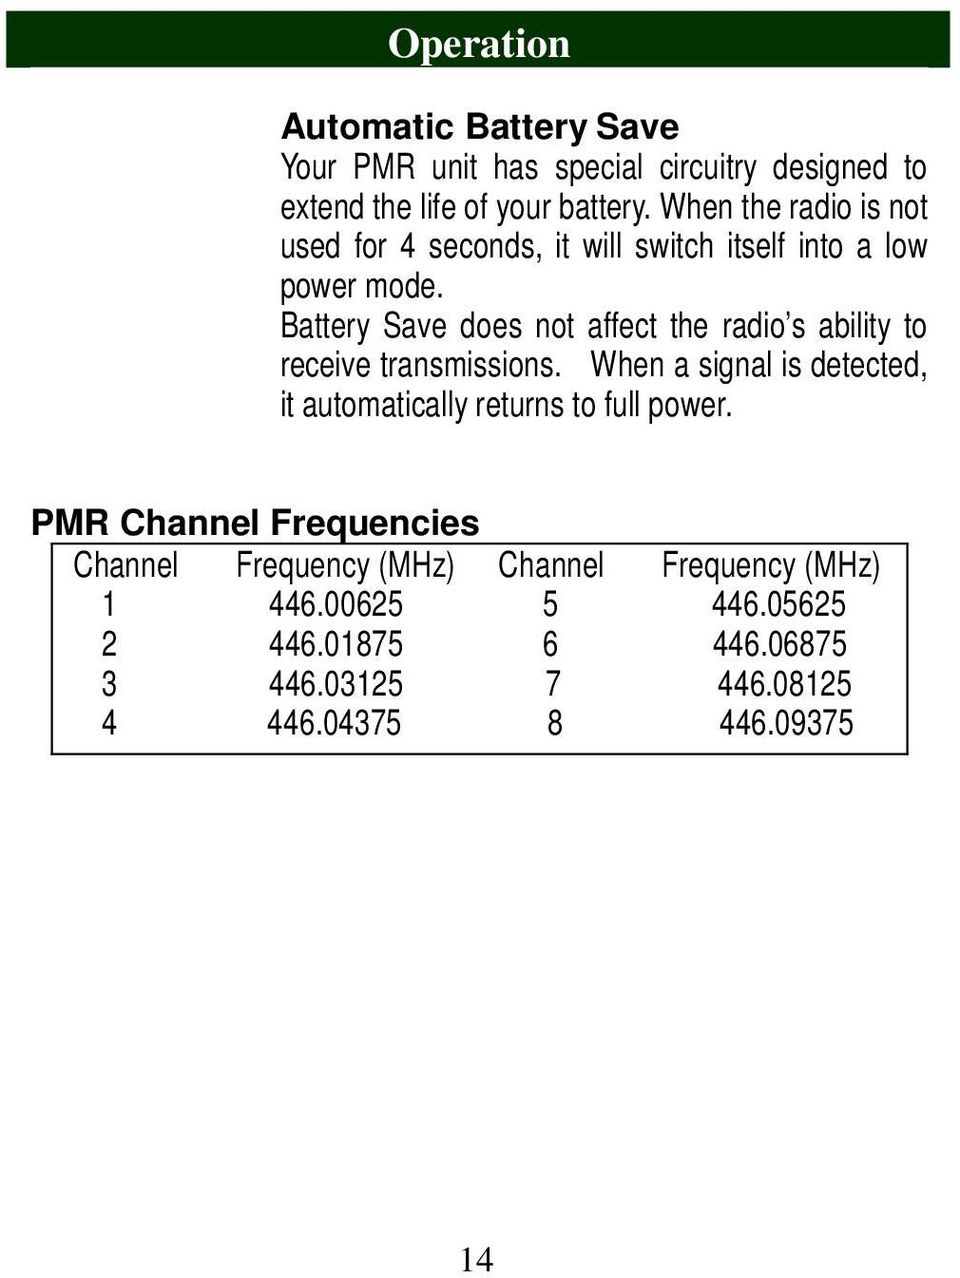 Battery Save does not affect the radio s ability to receive transmissions.